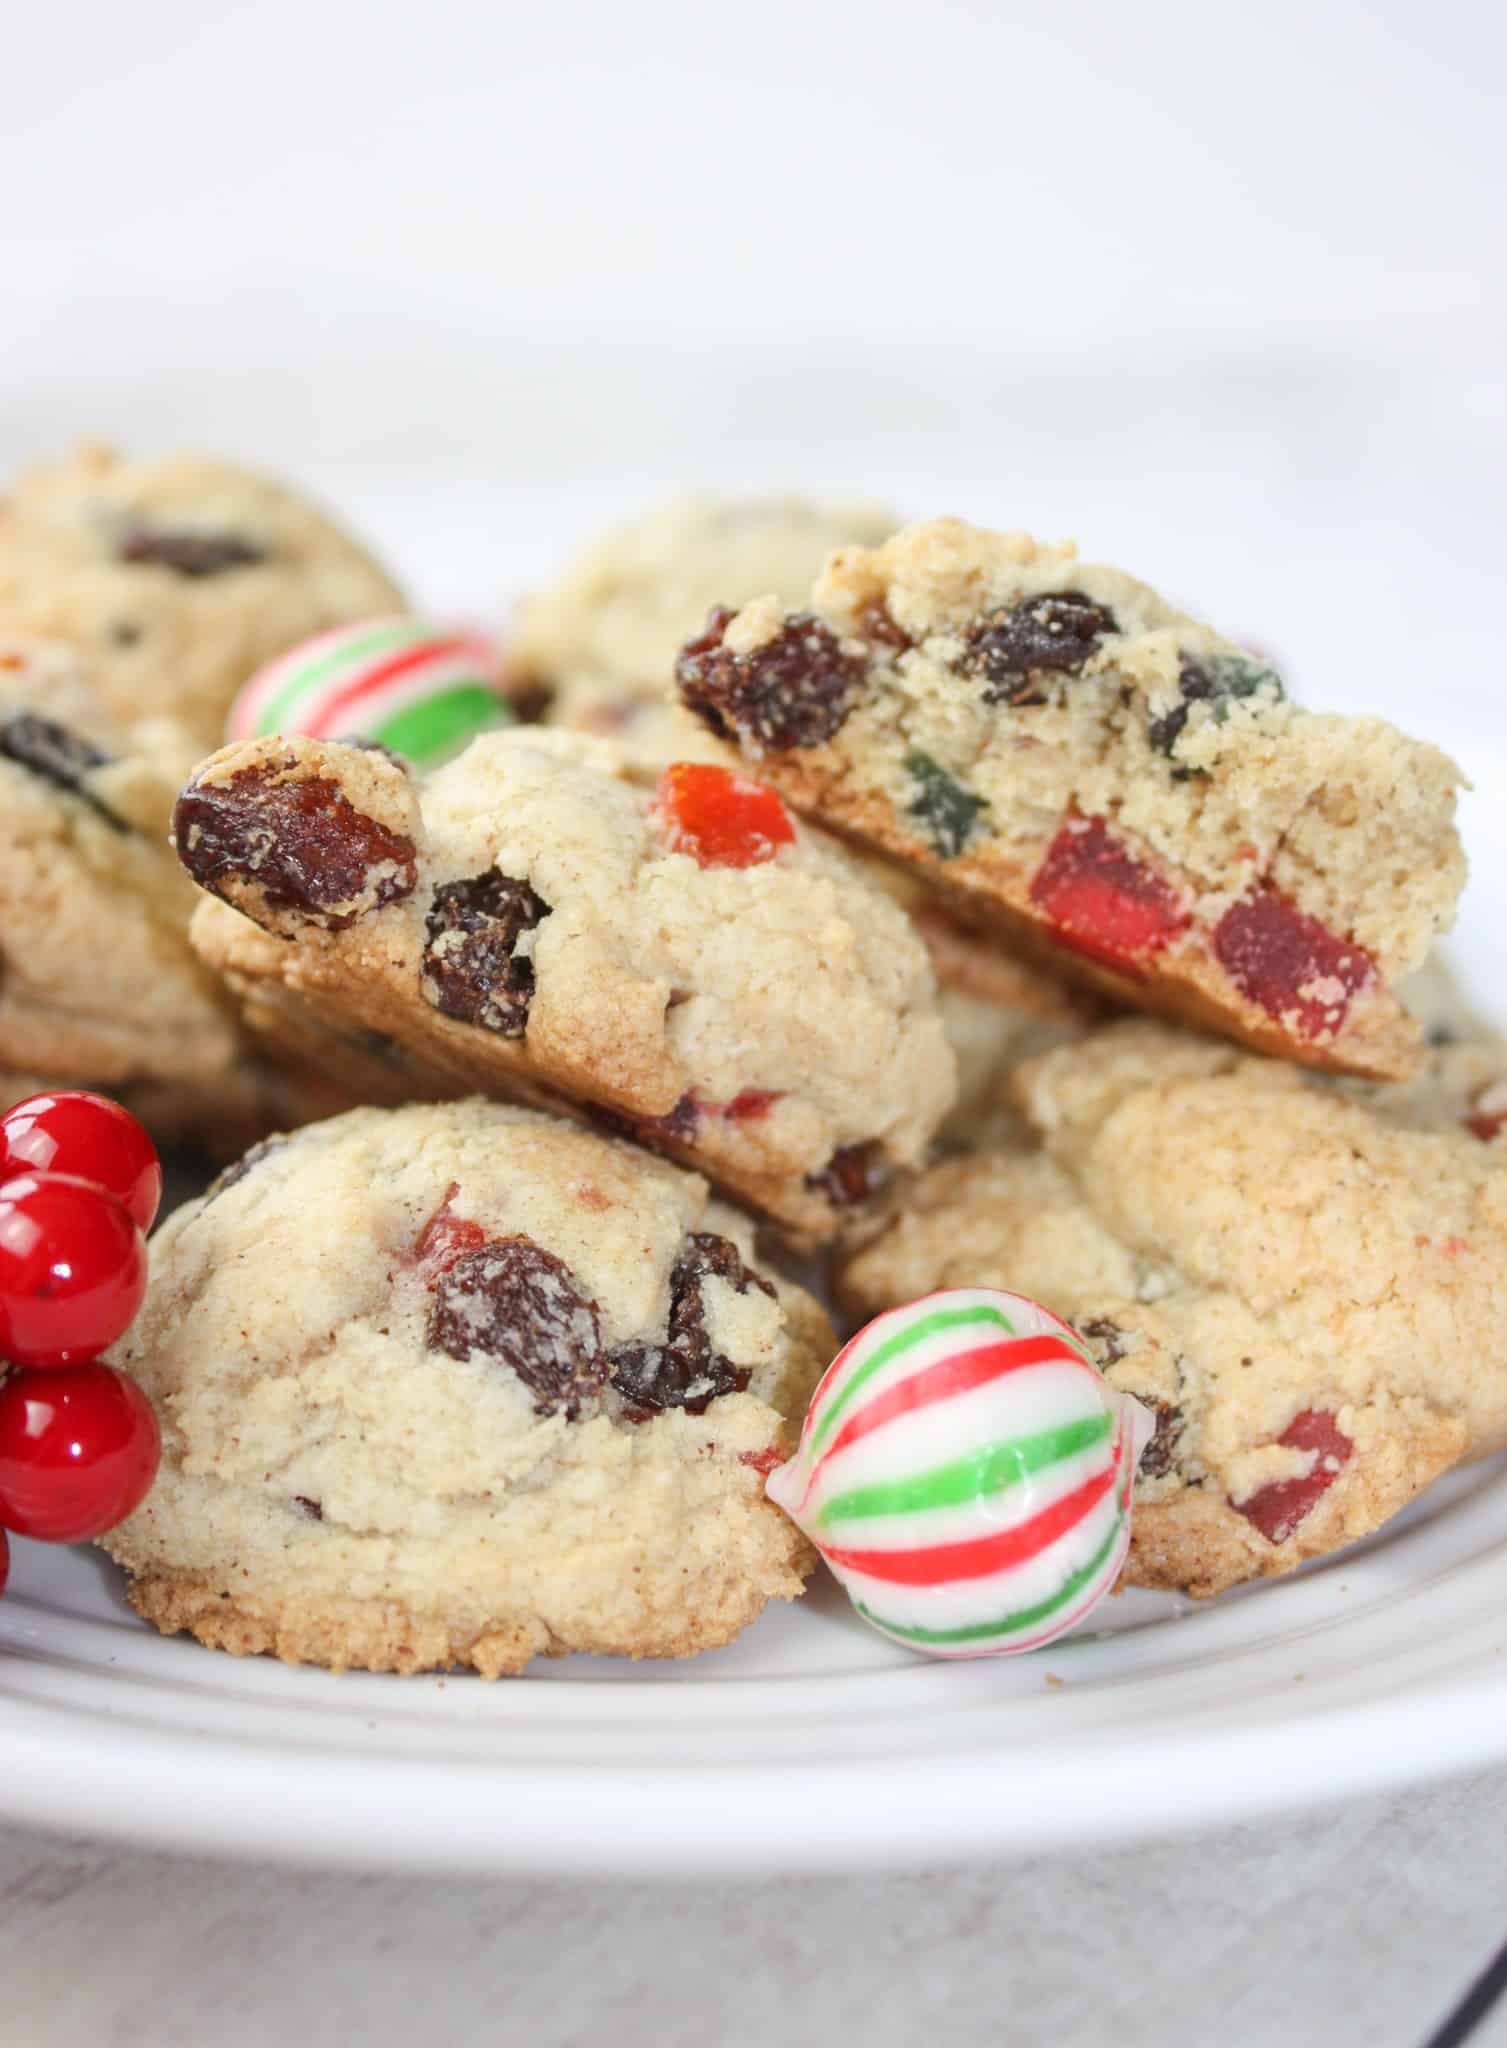 These Festive Fruit Cookies are tasty little bites that will be a great gluten free addition to your Holiday dessert tray.